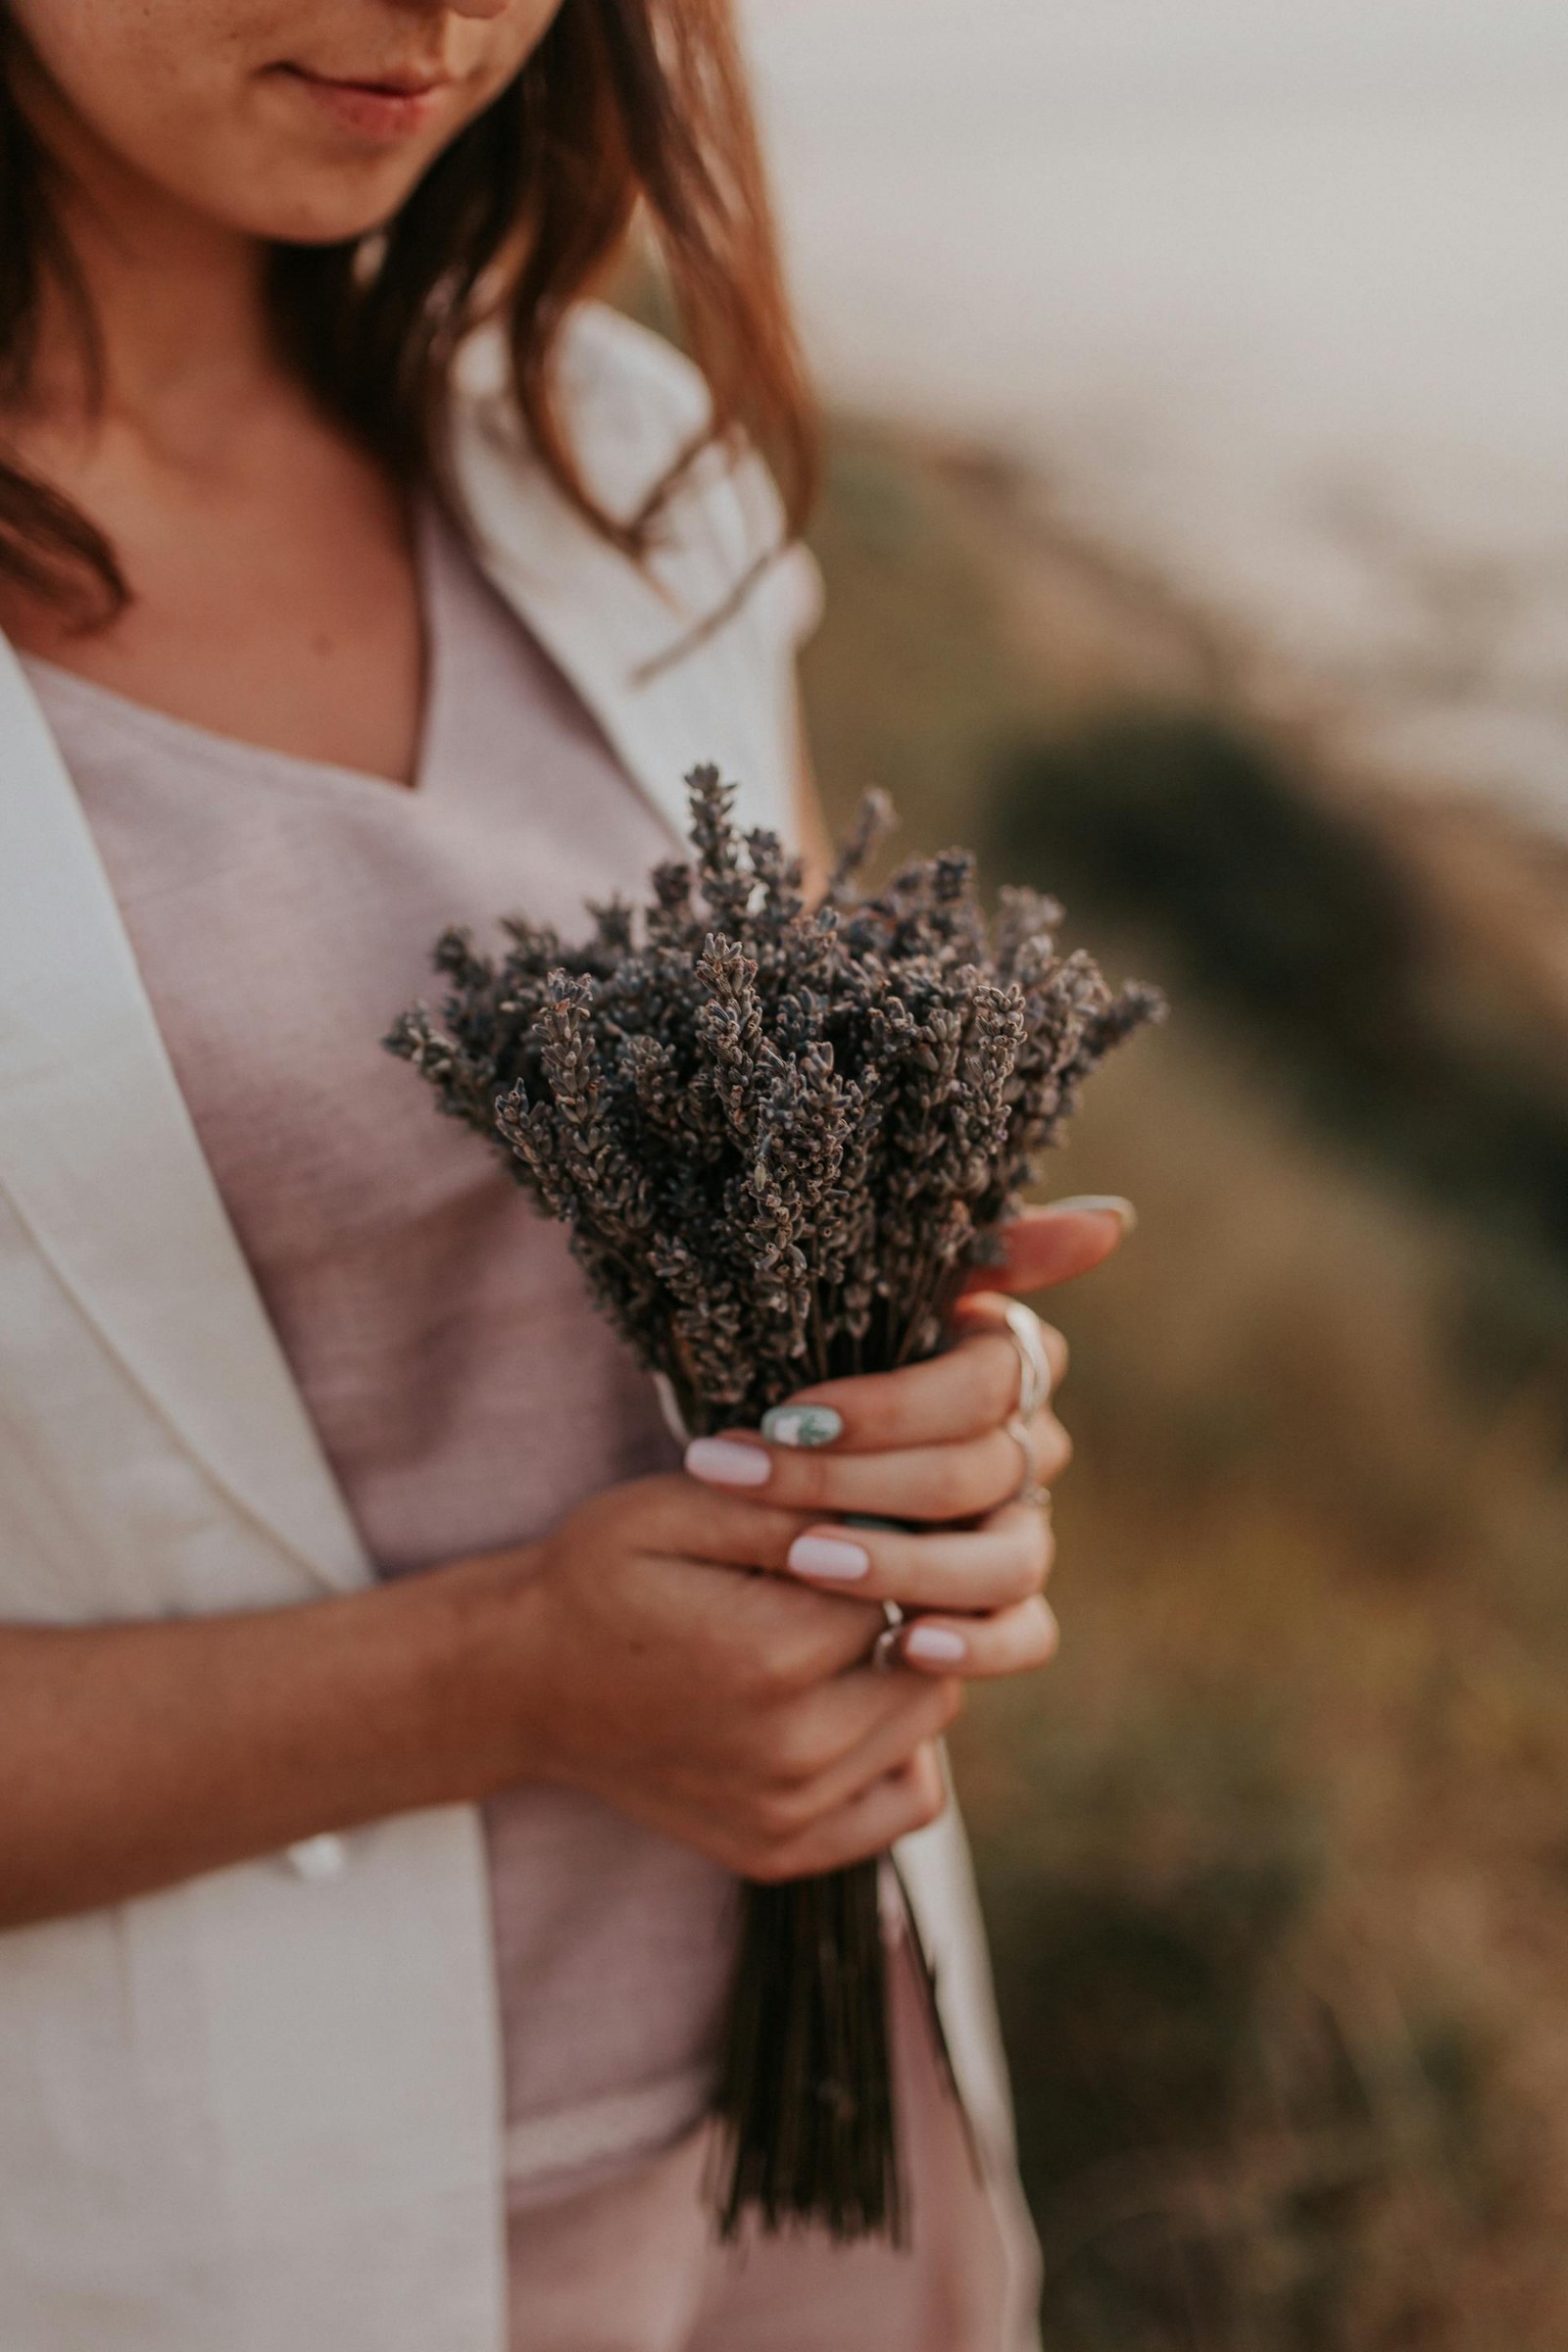 A woman holding a bundle of lavender outside.